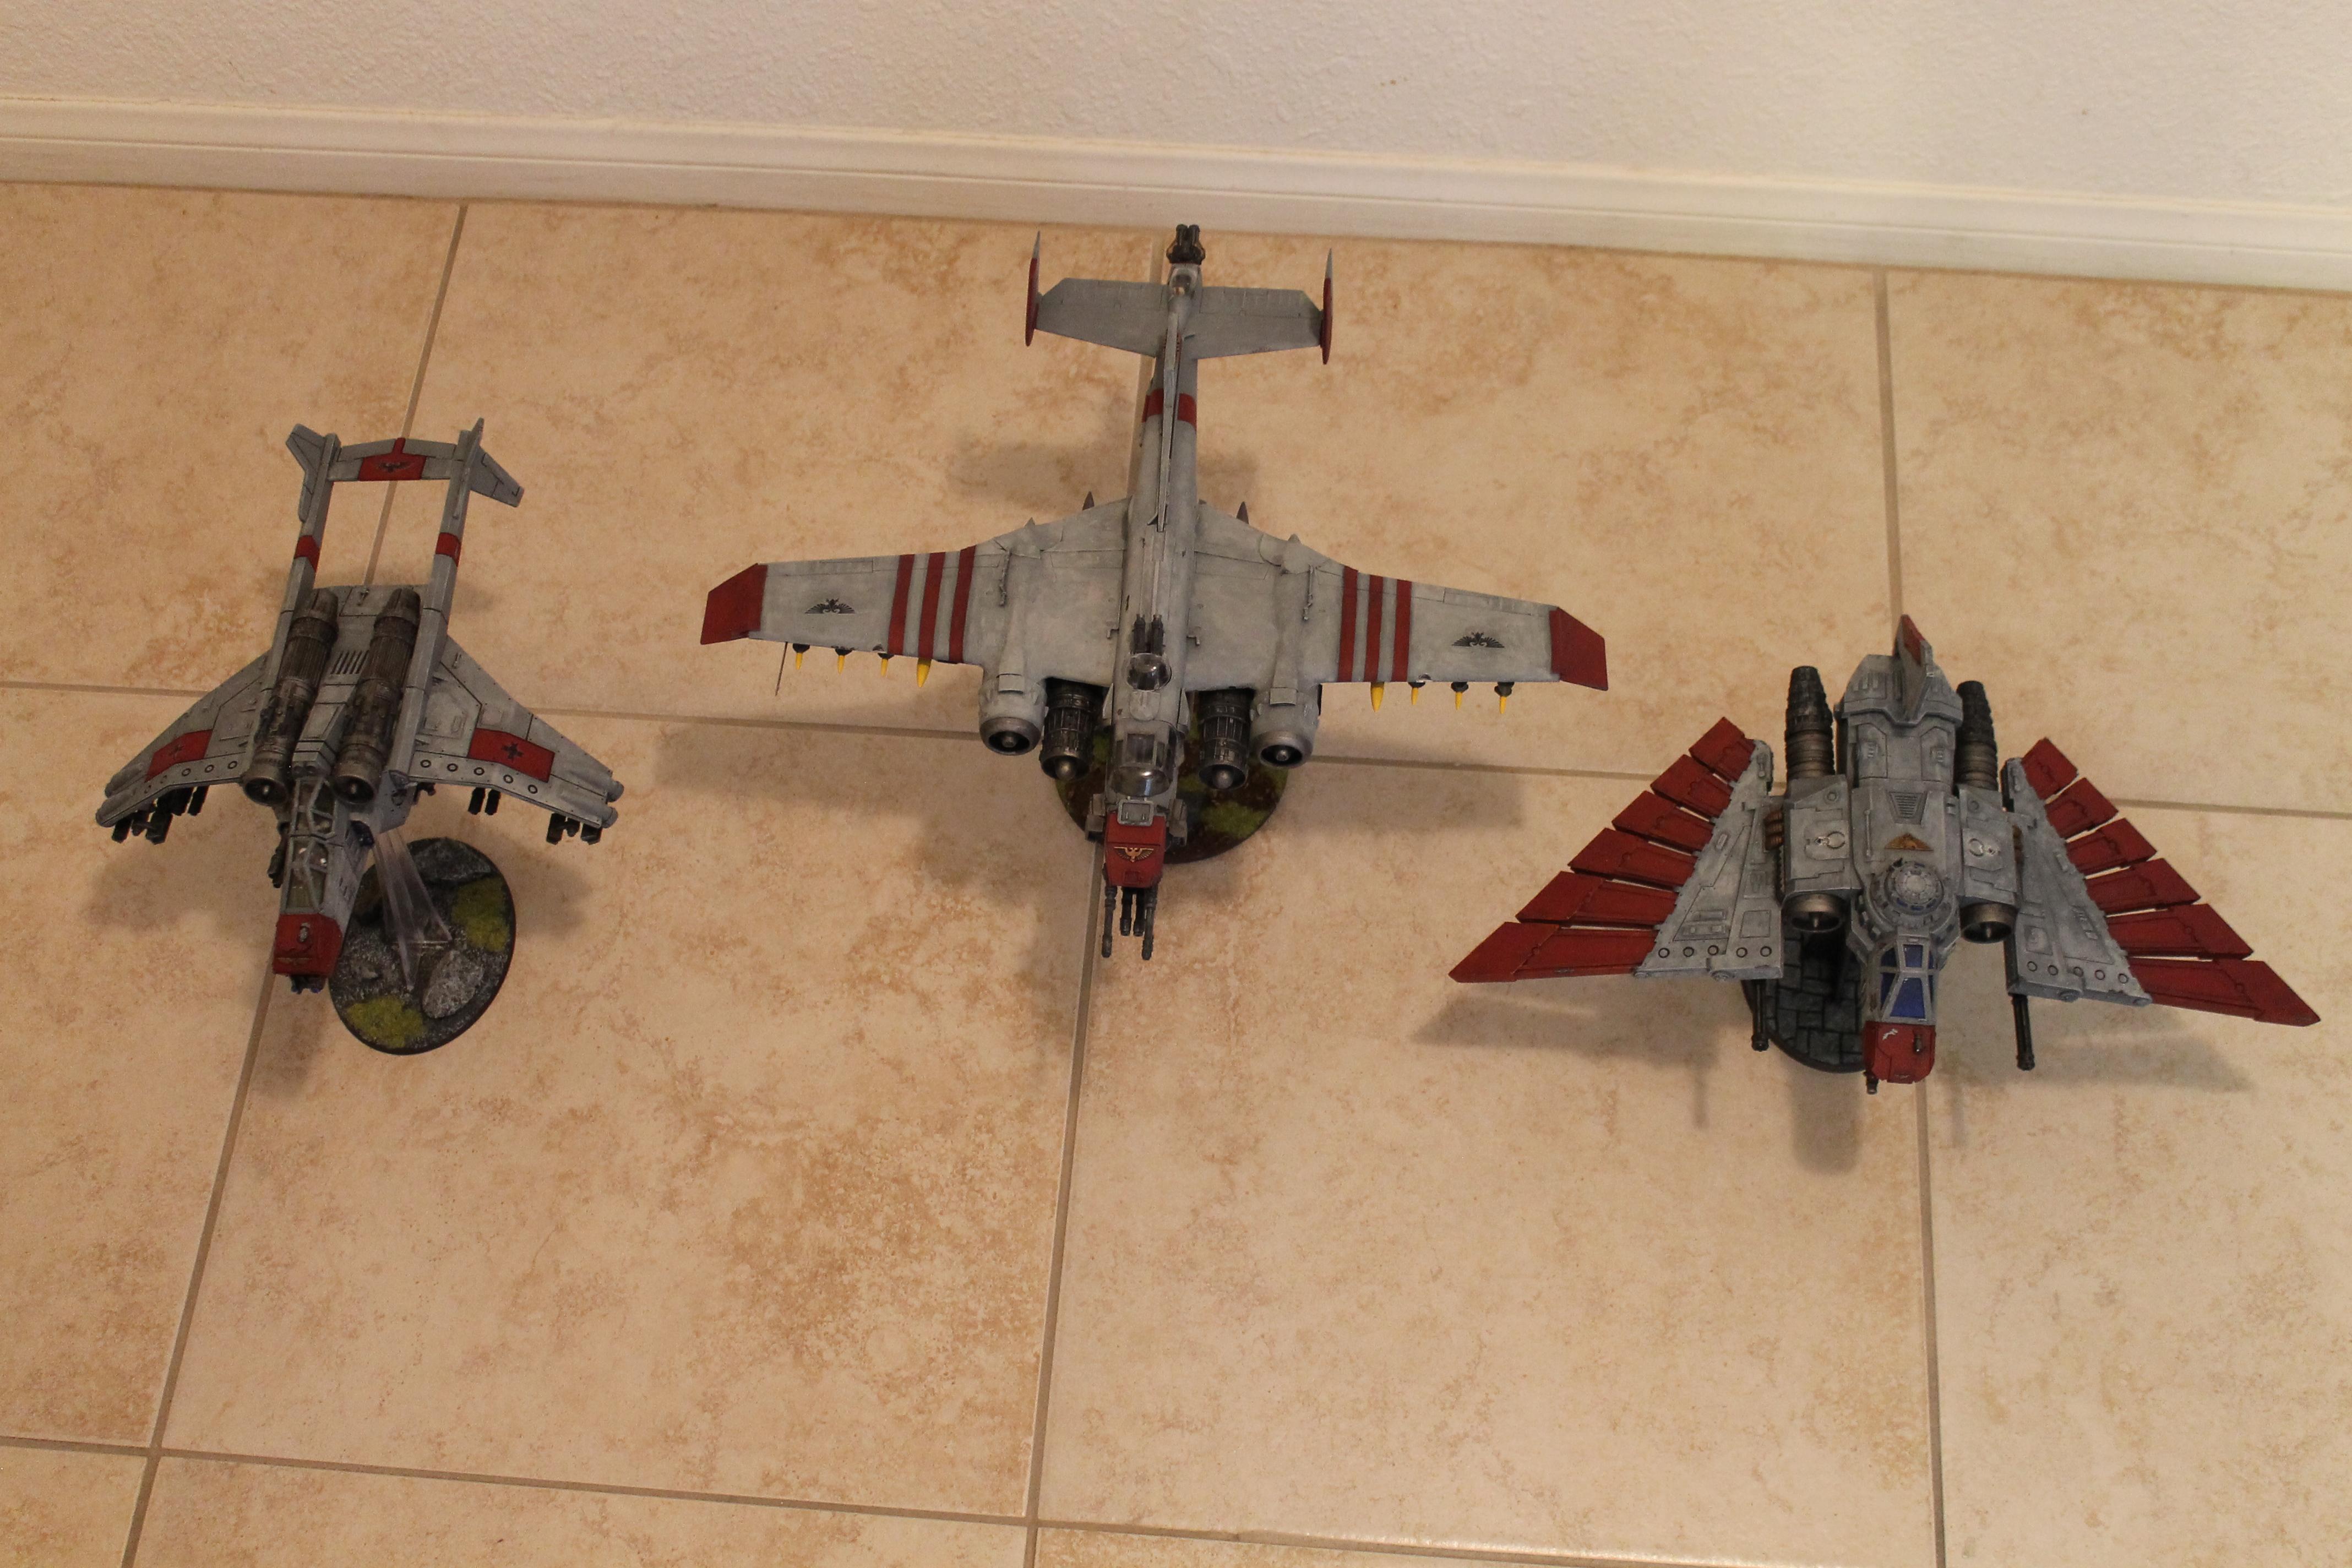 Bomber, Fliers, Flyer, Imperial Guard, Imperial Navy, Marauders, Valkyrie